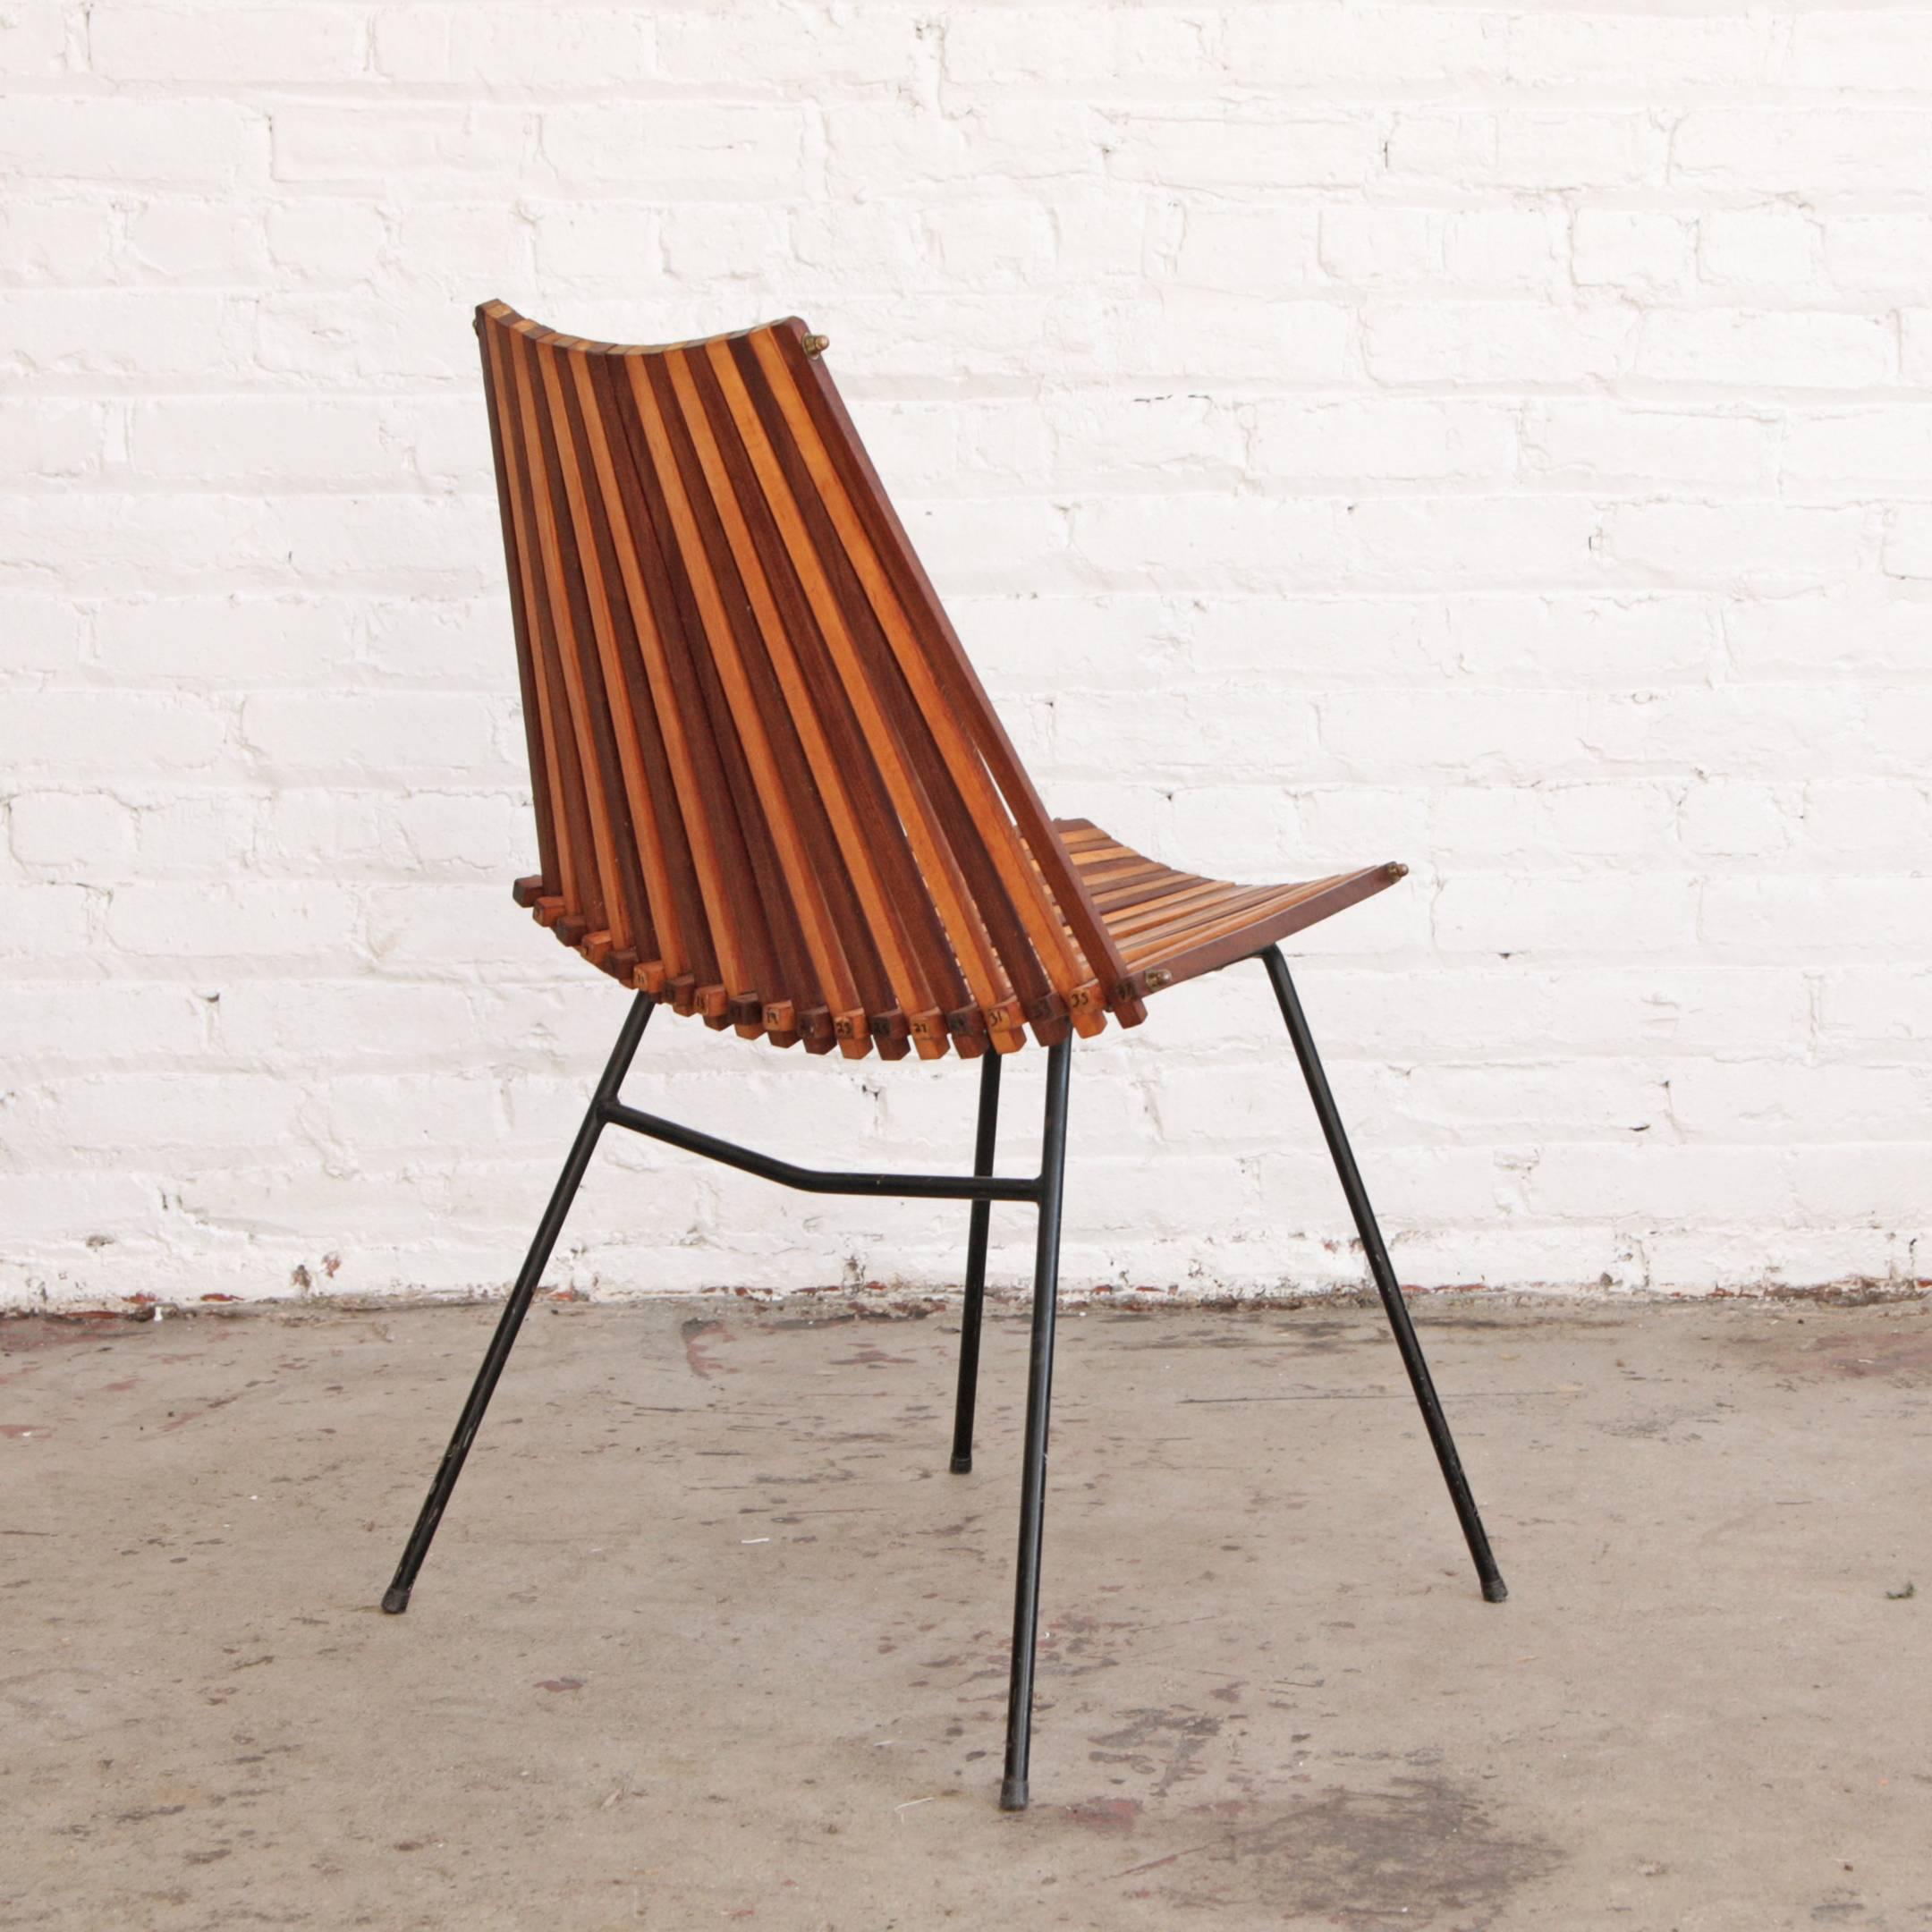 Lounge chair / side chair / desk chair by Dirk Van Sliedrecht for Rohé Noordwolde, Holland. Intersecting teak and birch two toned slats on wrought iron frame.